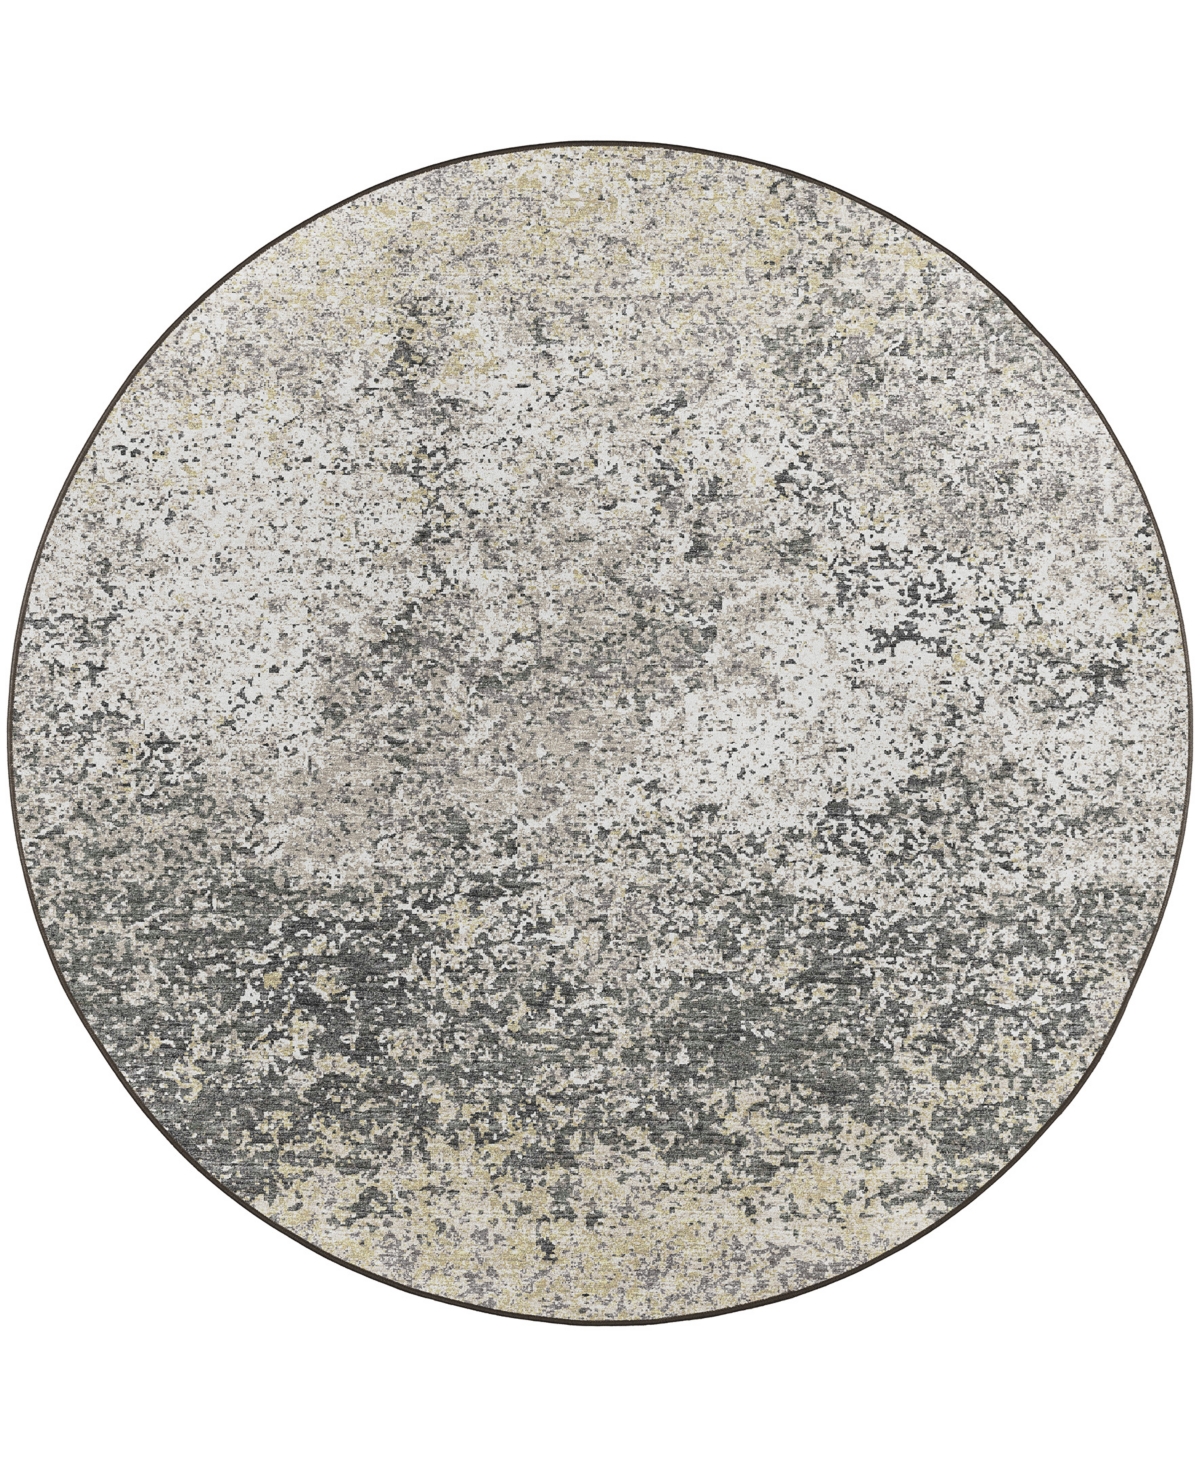 D Style Briggs Brg-3 6' x 6' Round Area Rug - Slate